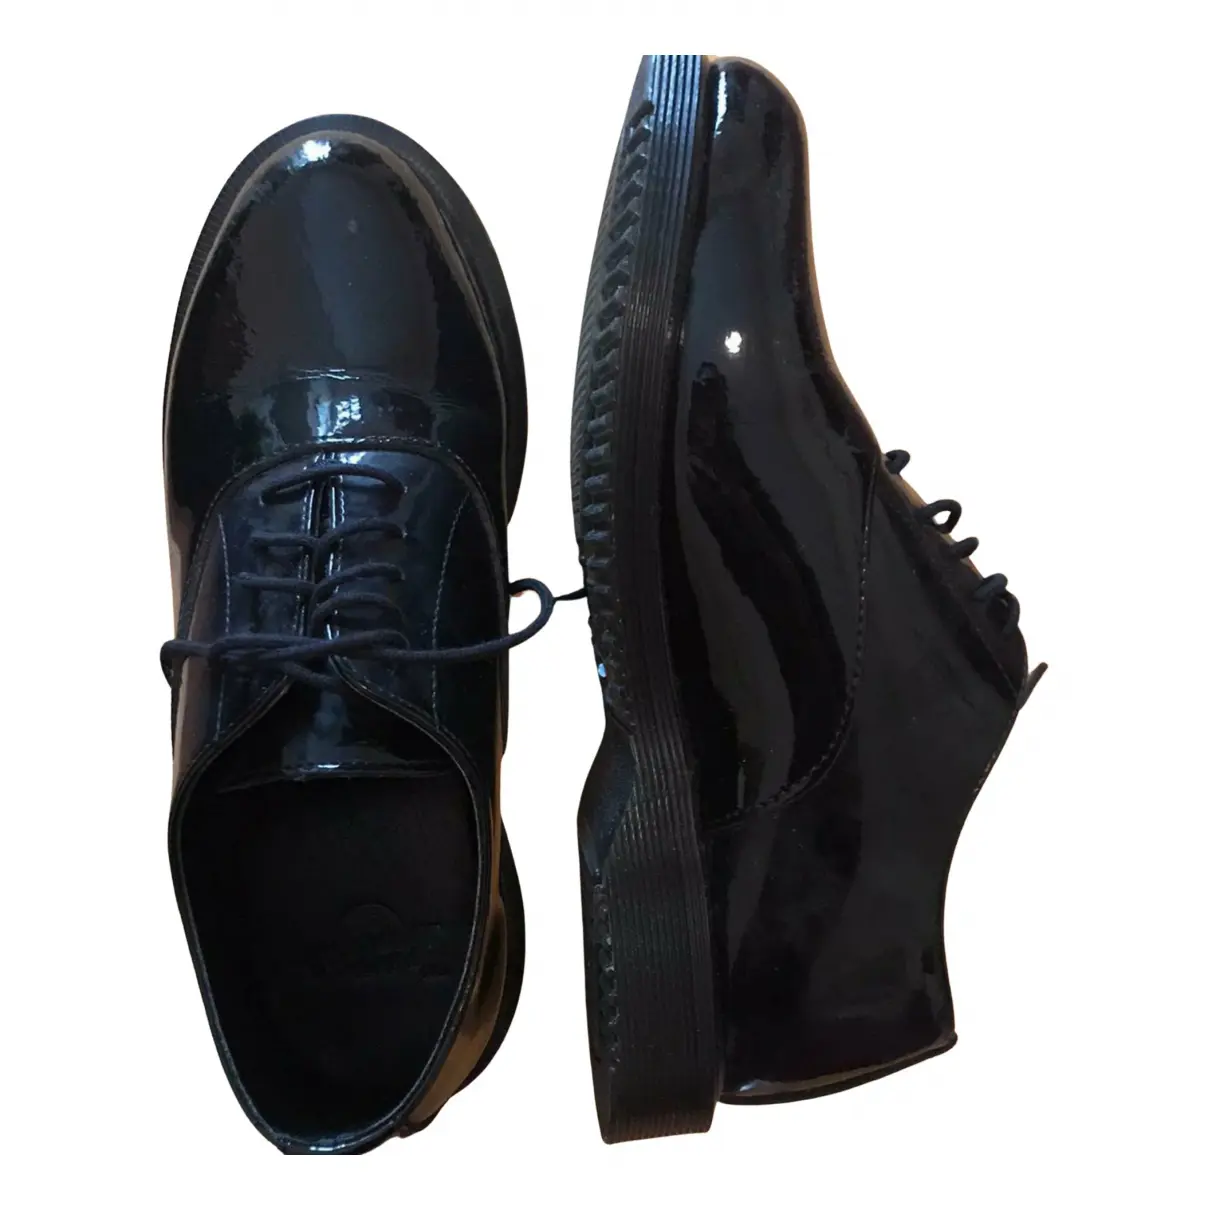 1461 (3 eye) patent leather lace ups Dr. Martens